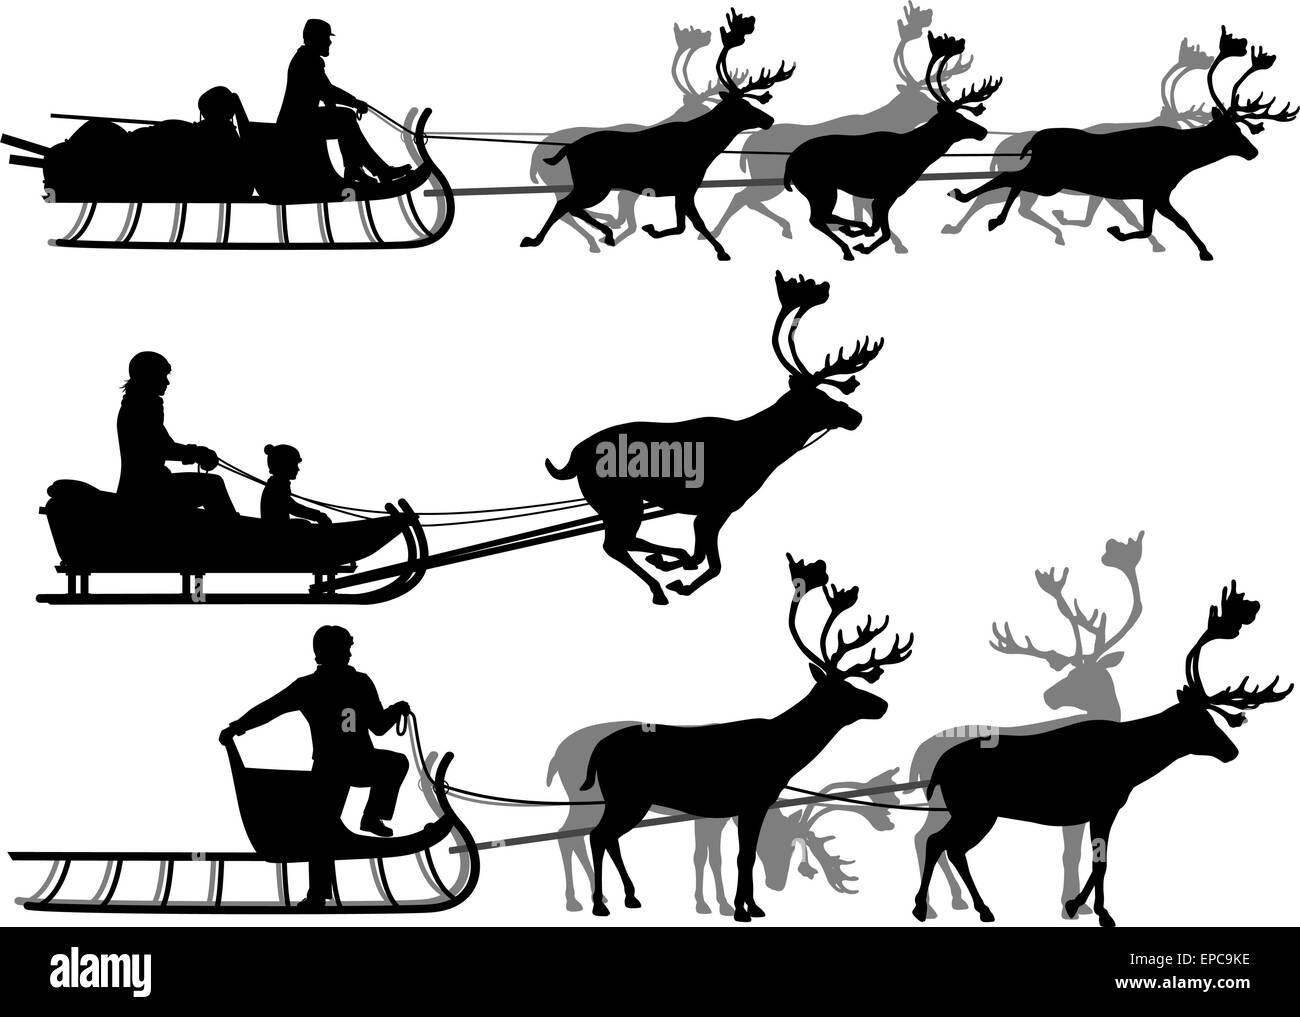 Set of eps8 editable vector silhouettes of people in sleighs pulled by reindeer with all figures as separate objects Stock Vector